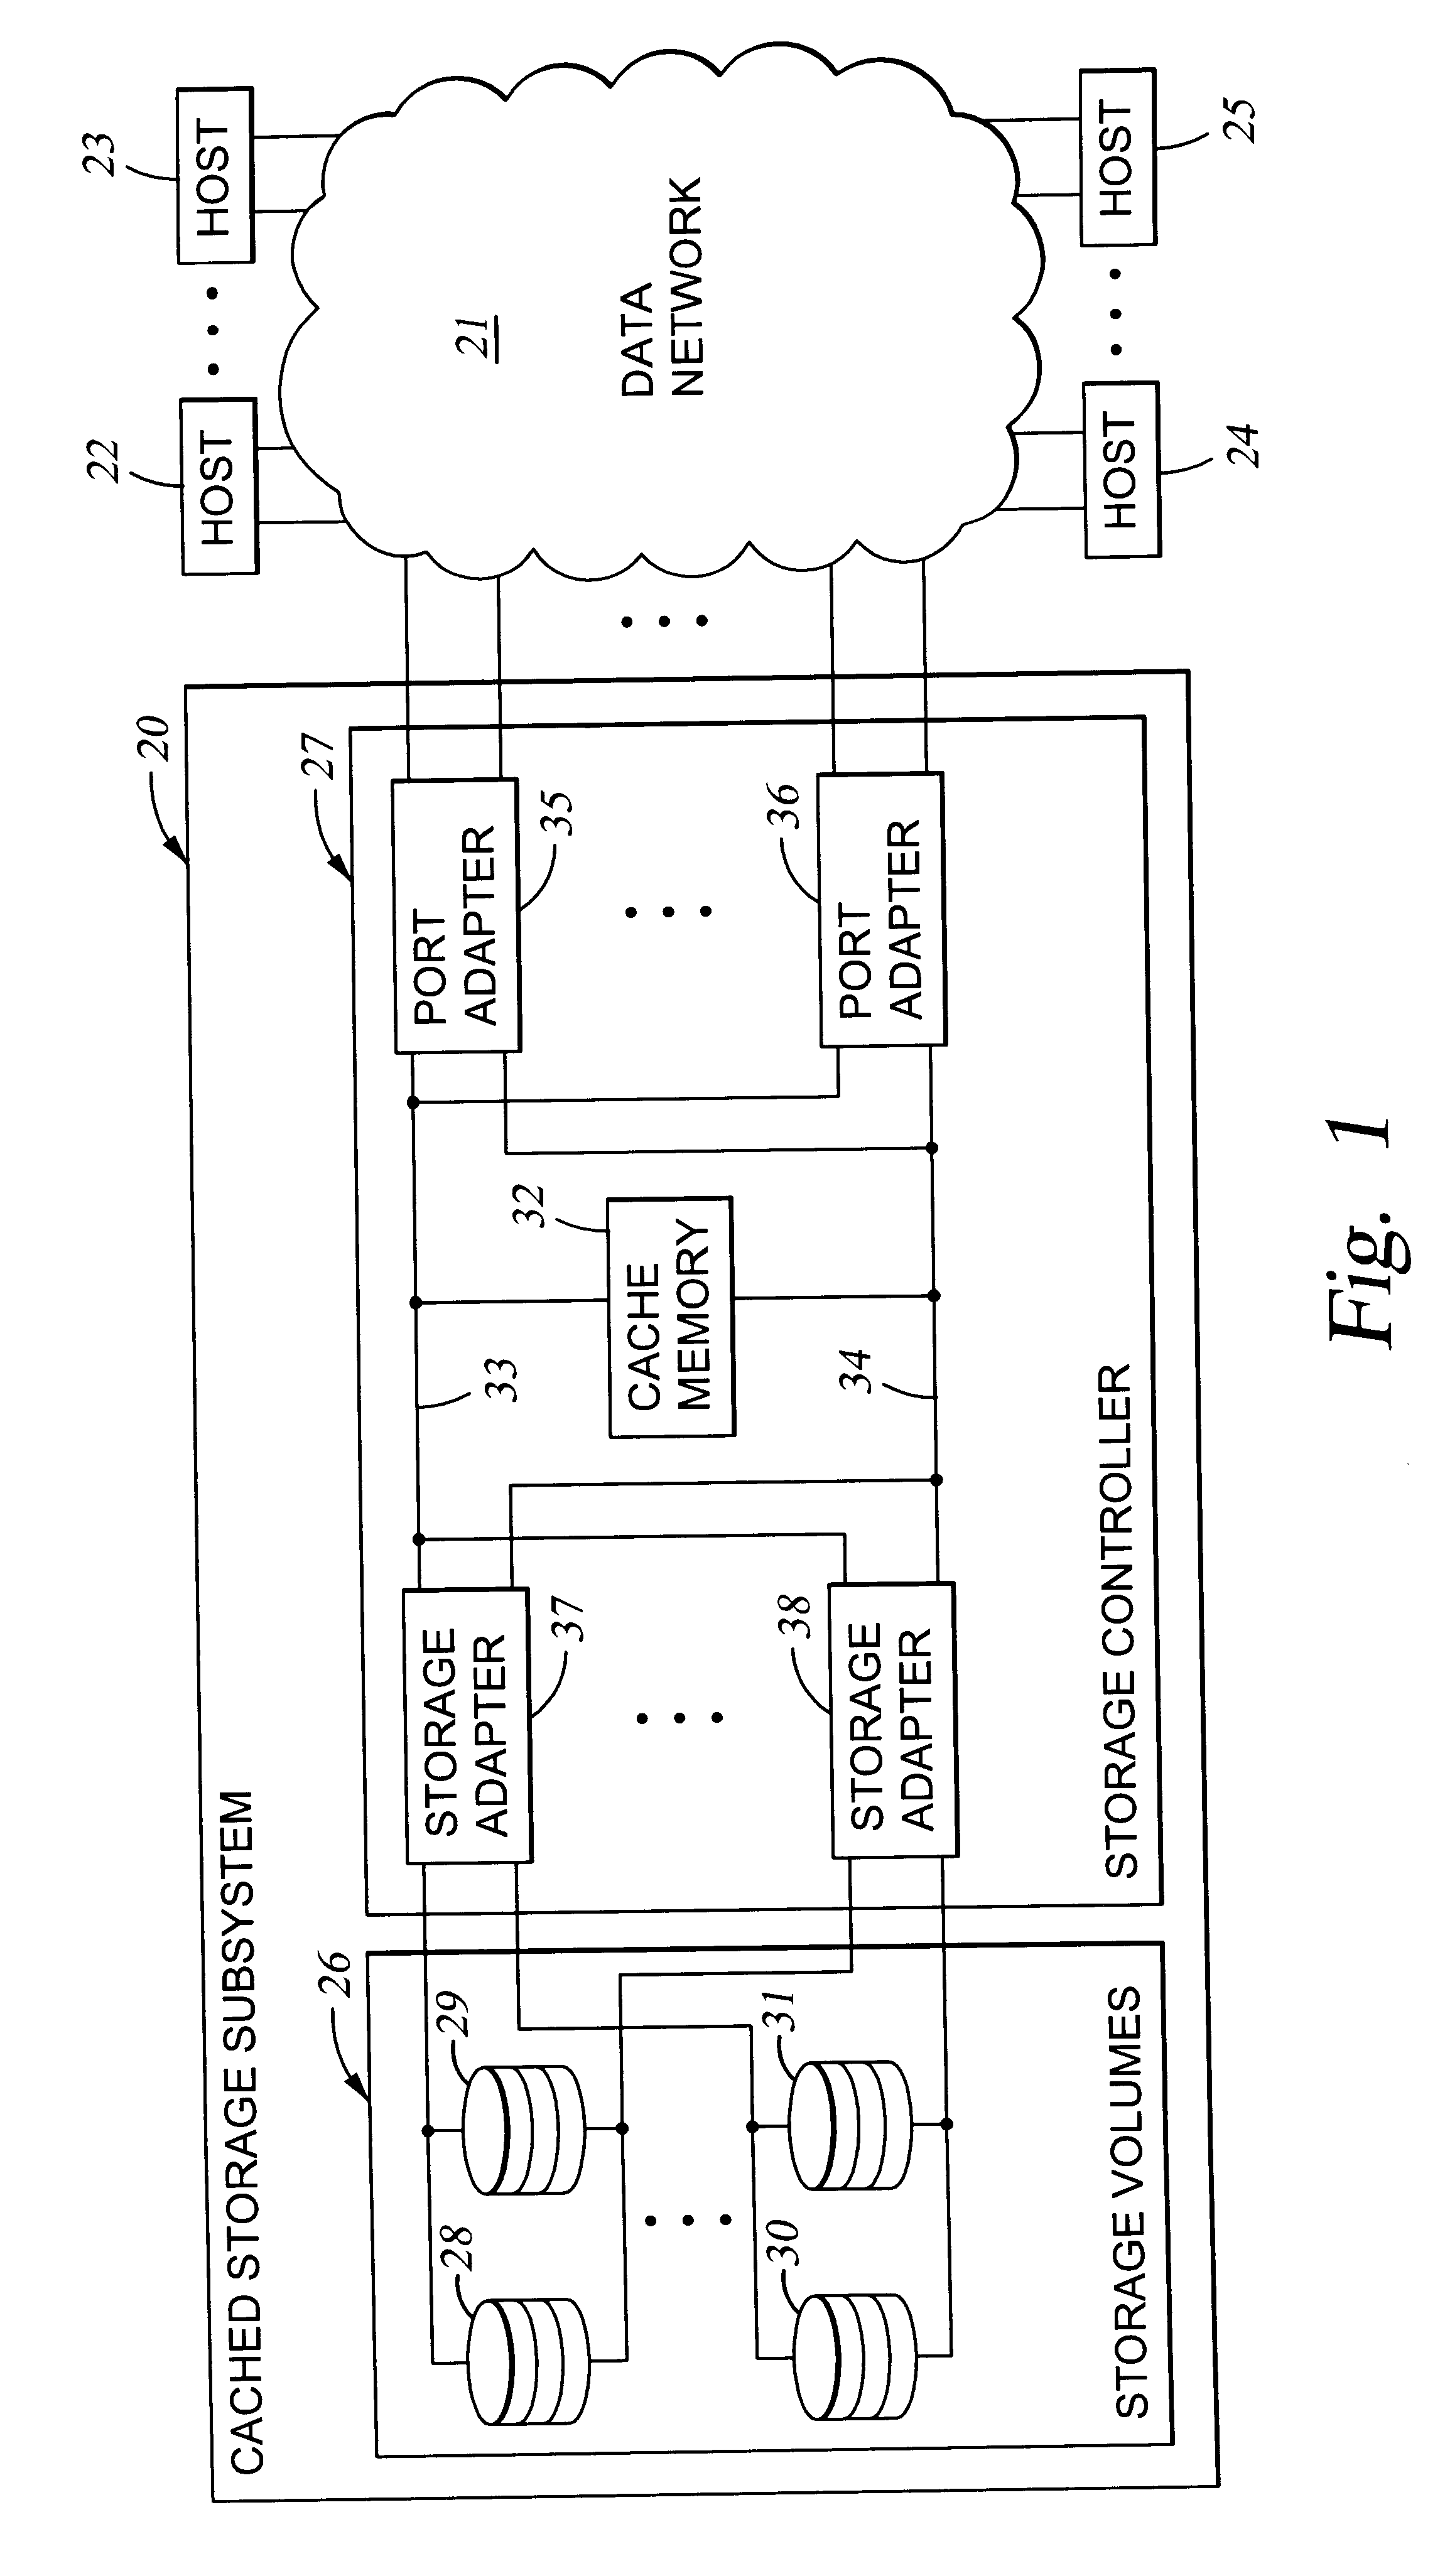 Virtual ports for data transferring of a data storage system